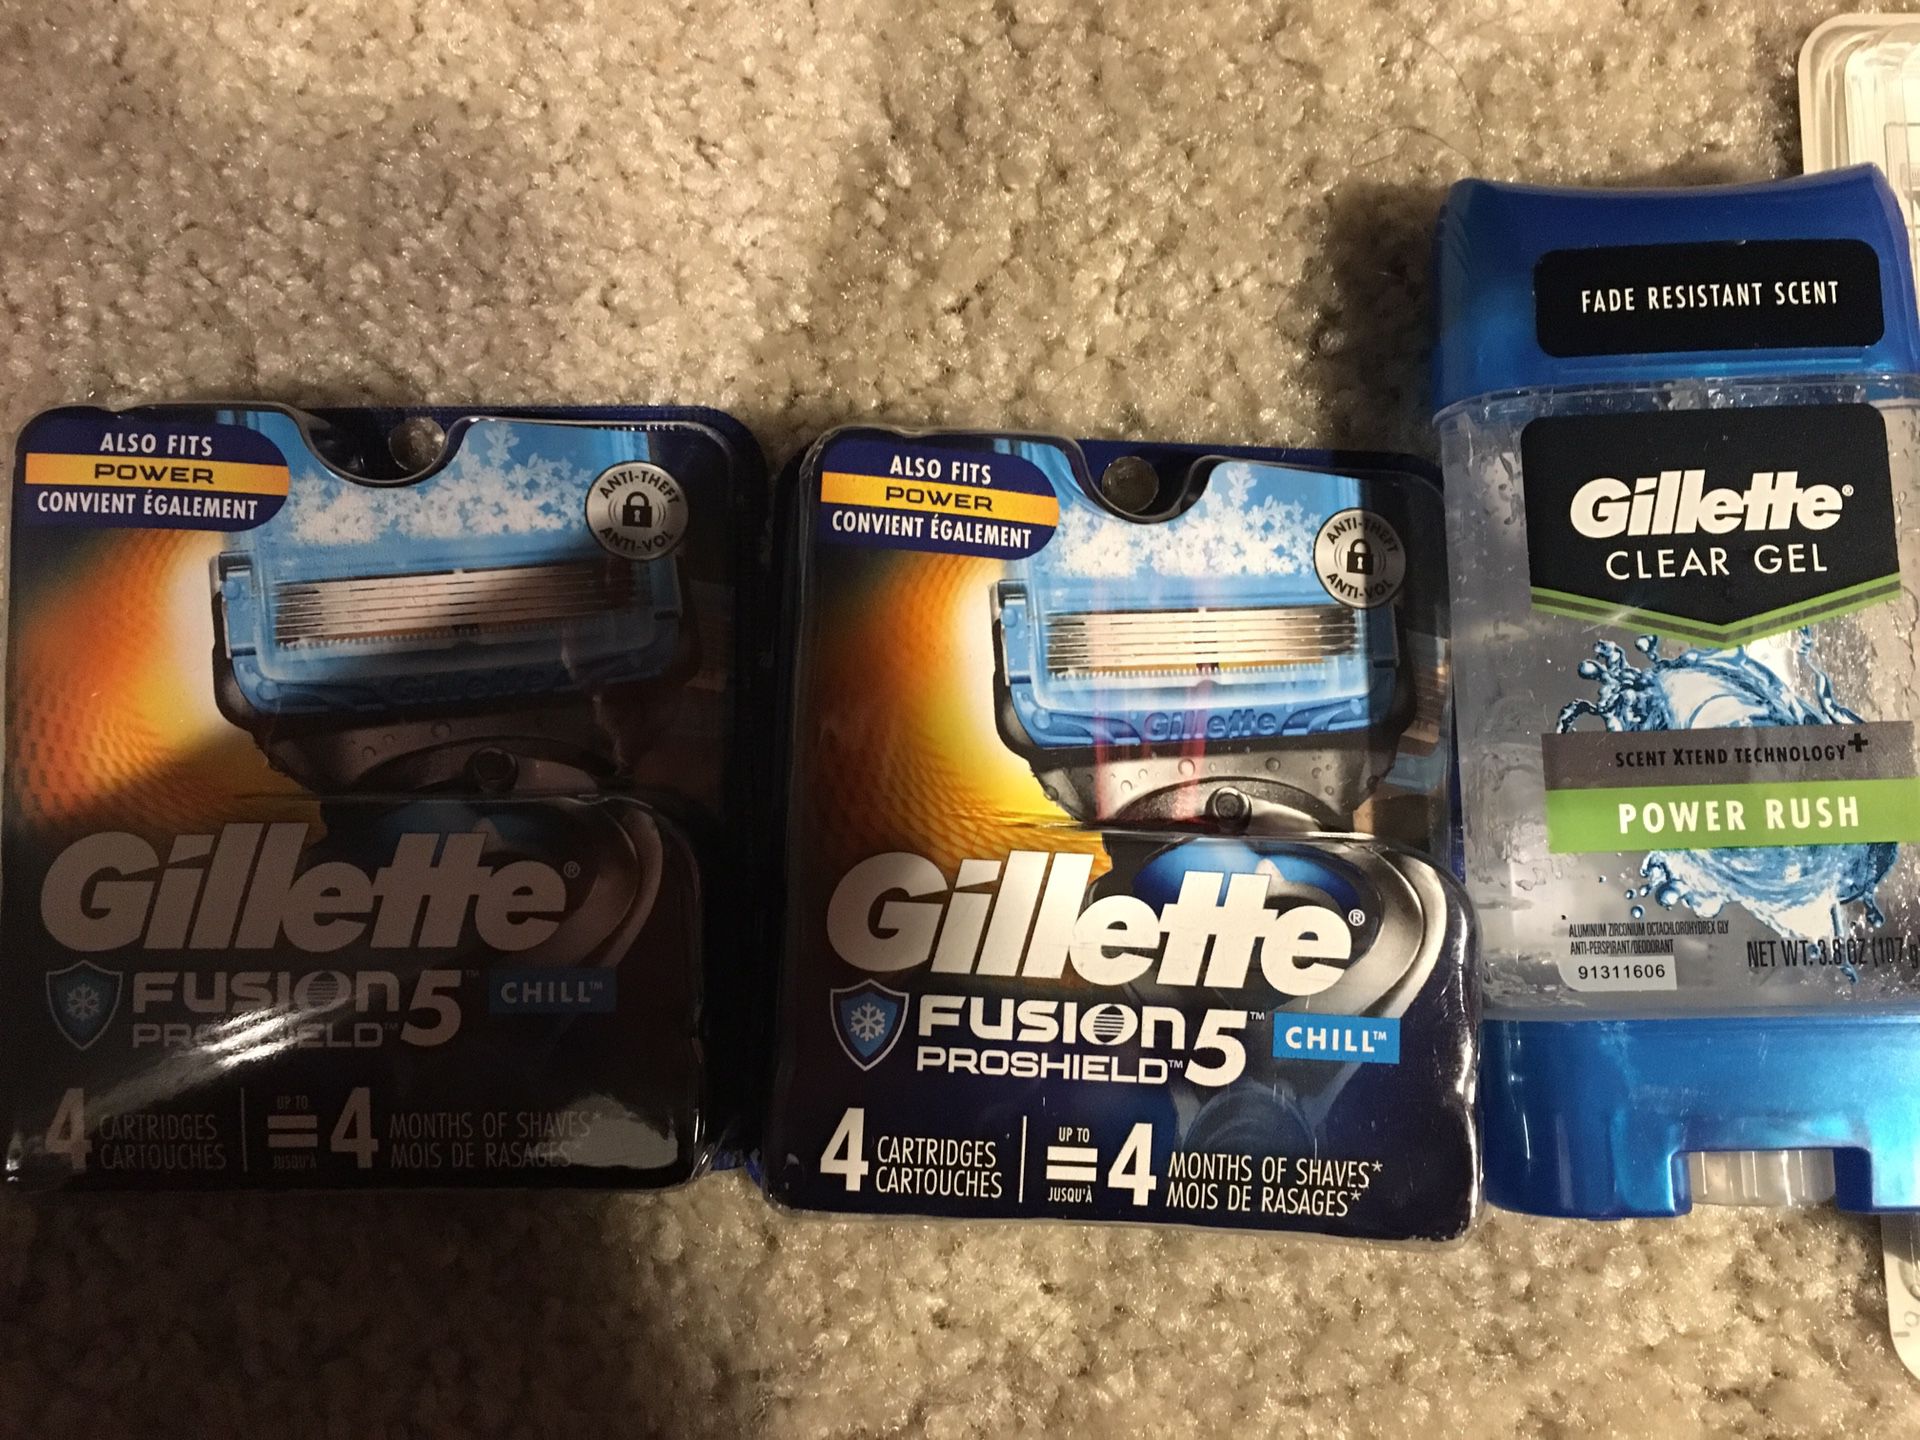 New 2 4 packs of Gillette razors and one deodorant